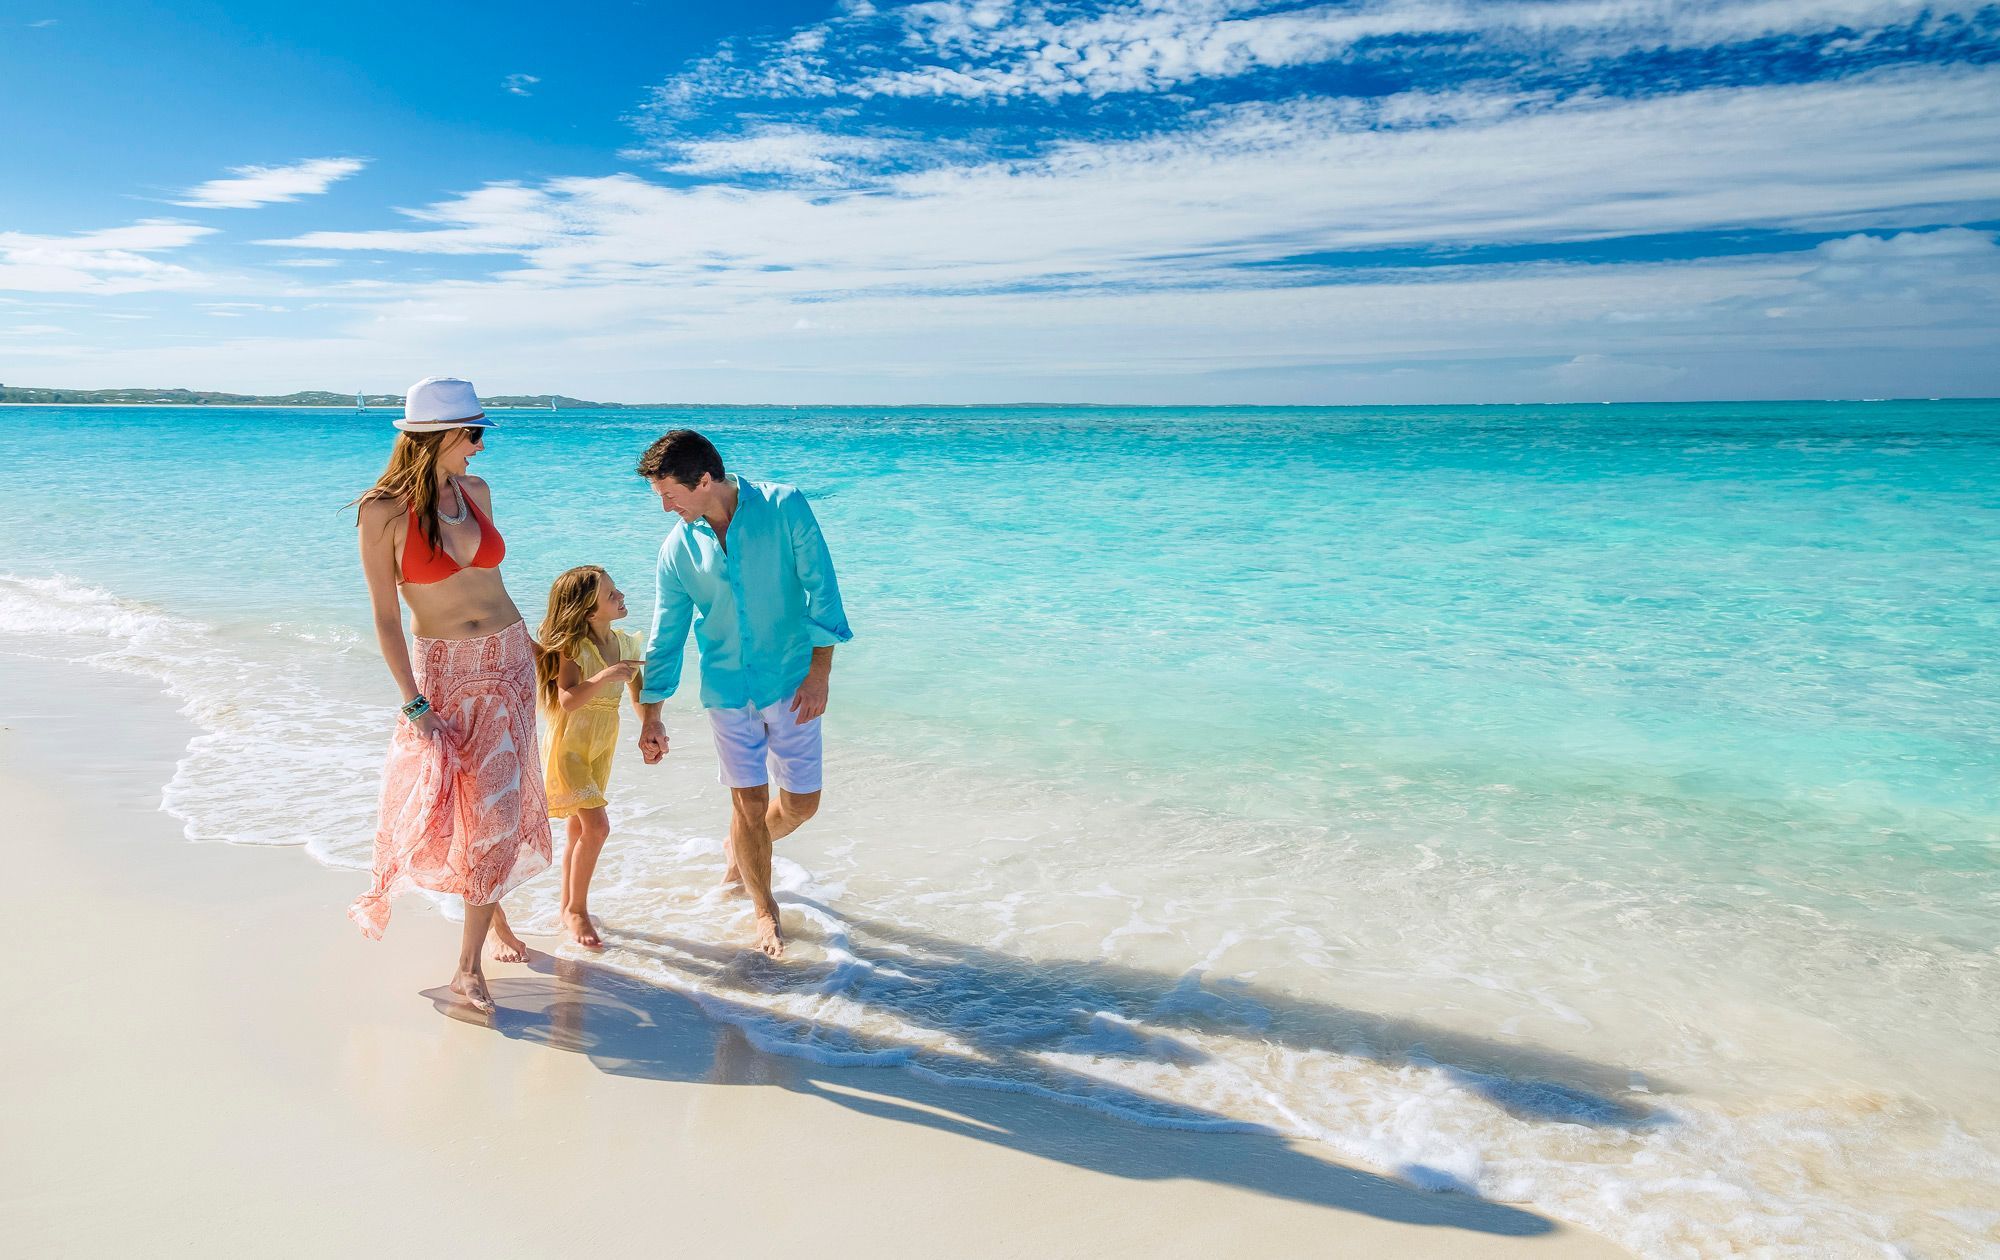 5 Reasons Why Beaches Resorts by Sandals are Perfect for Families - The Savvy Pixie